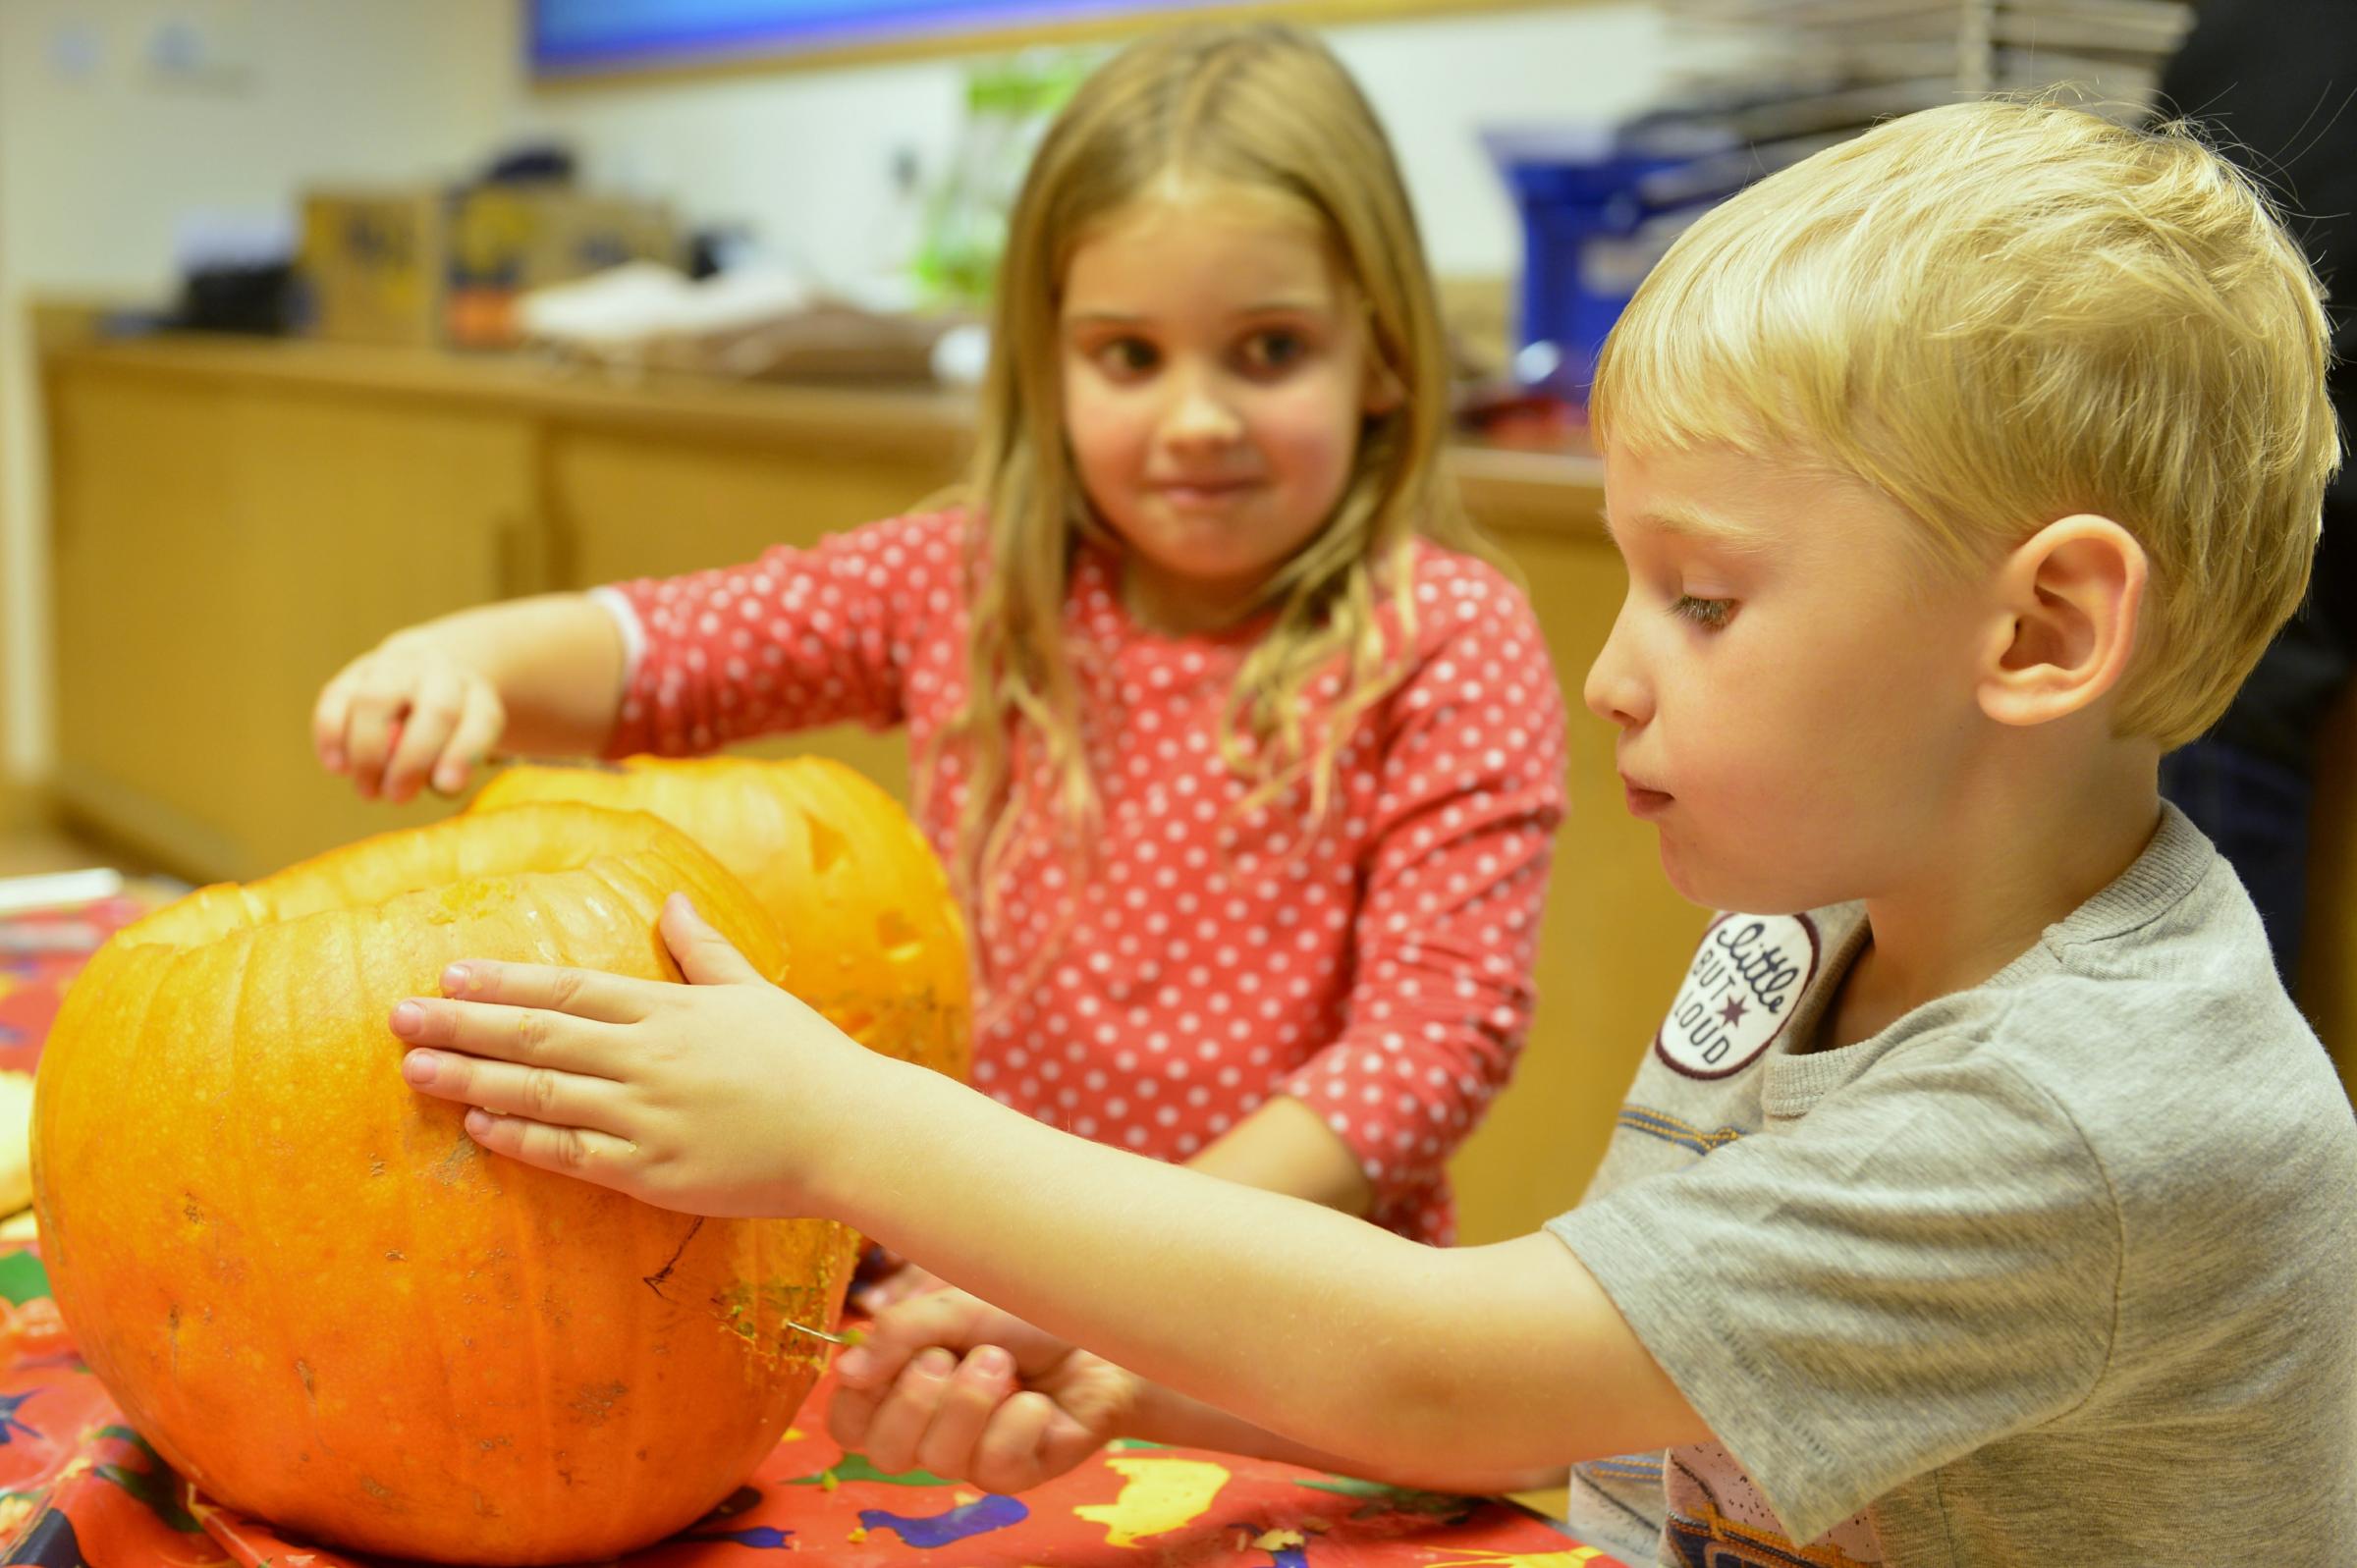 Autumn half term Halloween fun at Tullie House Museum and Art Gallery. A pumpkin carving workshop for children, Hannah, five and Harrison Smith, four from Cotehill, Carlisle carve their pumpkins: 24 October 2016 STUART WALKER 50086030T007.JPG